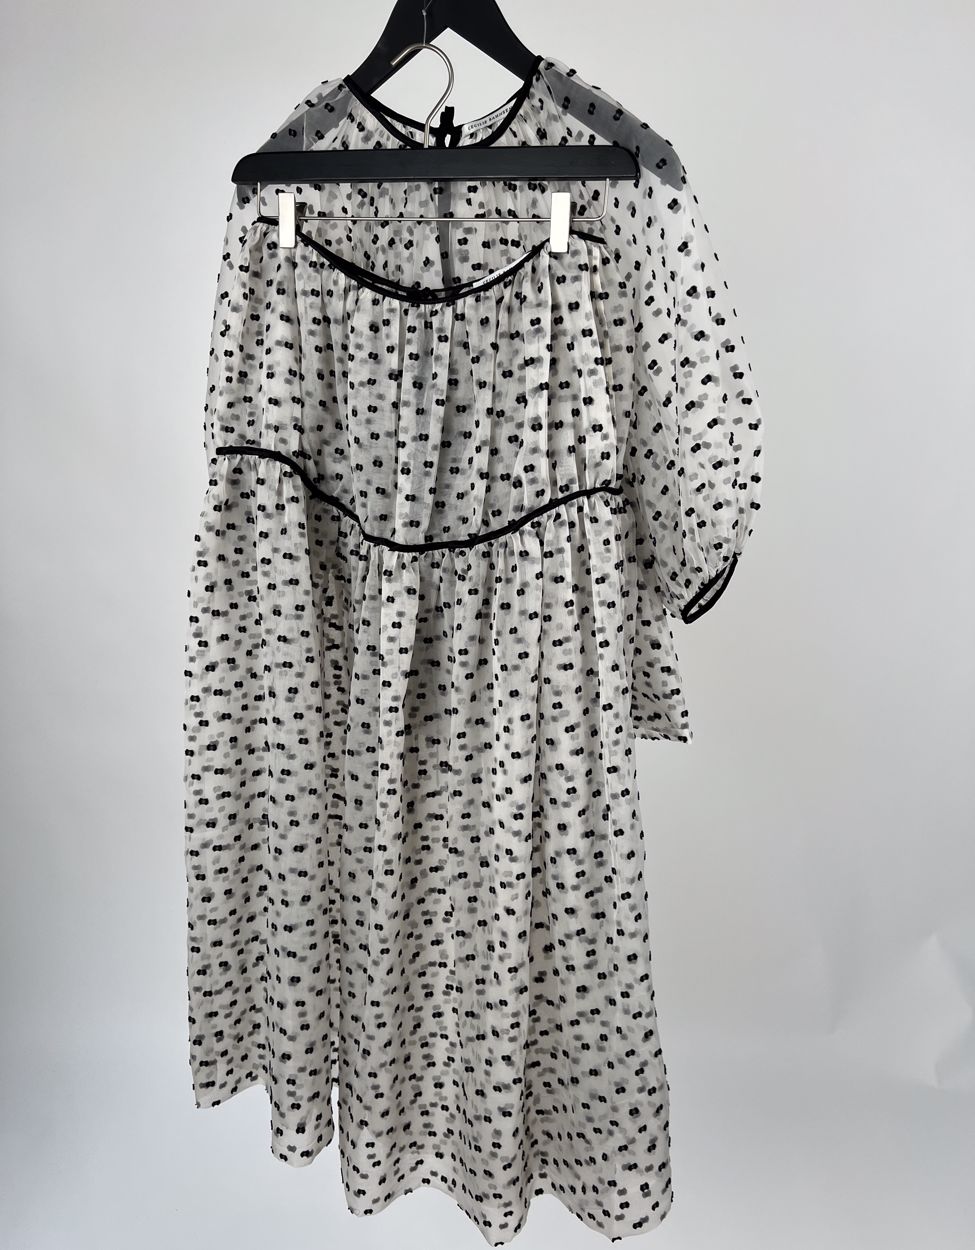 Cecilie bahnsen skirt and top size uk10